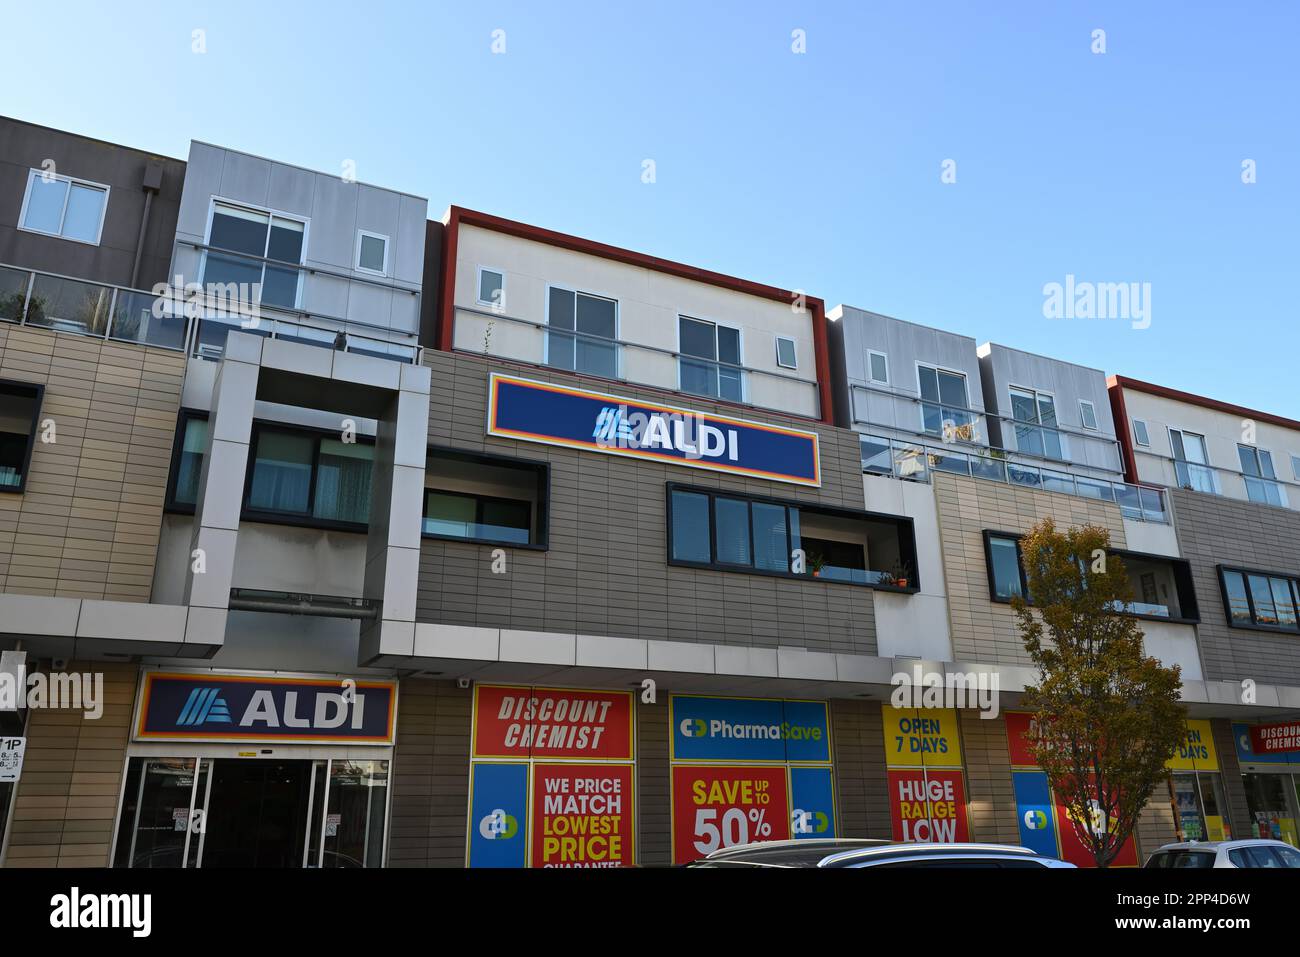 Modern building on Centre Rd featuring an Aldi supermarket and Pharmasave discount chemist alongside apartments Stock Photo